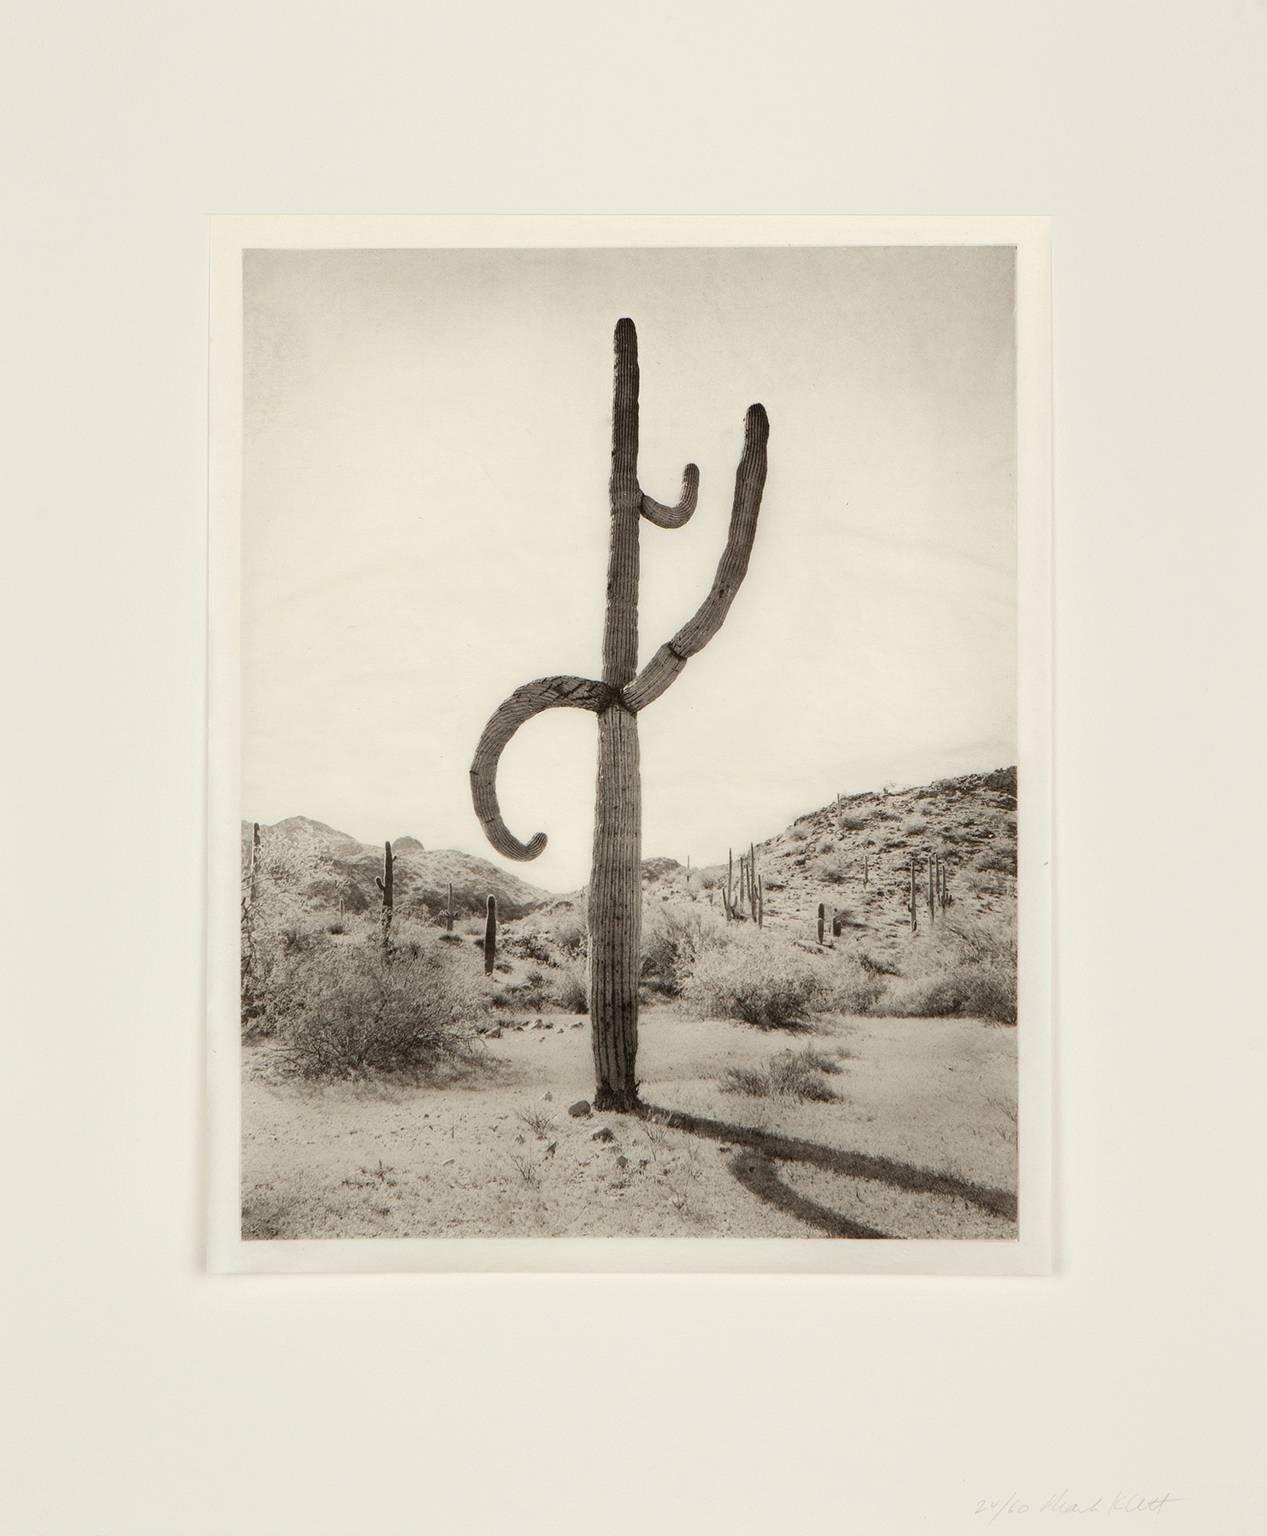 Saguaro Diptych: 5 16-1 and 5 16-4 - Print by Mark Klett